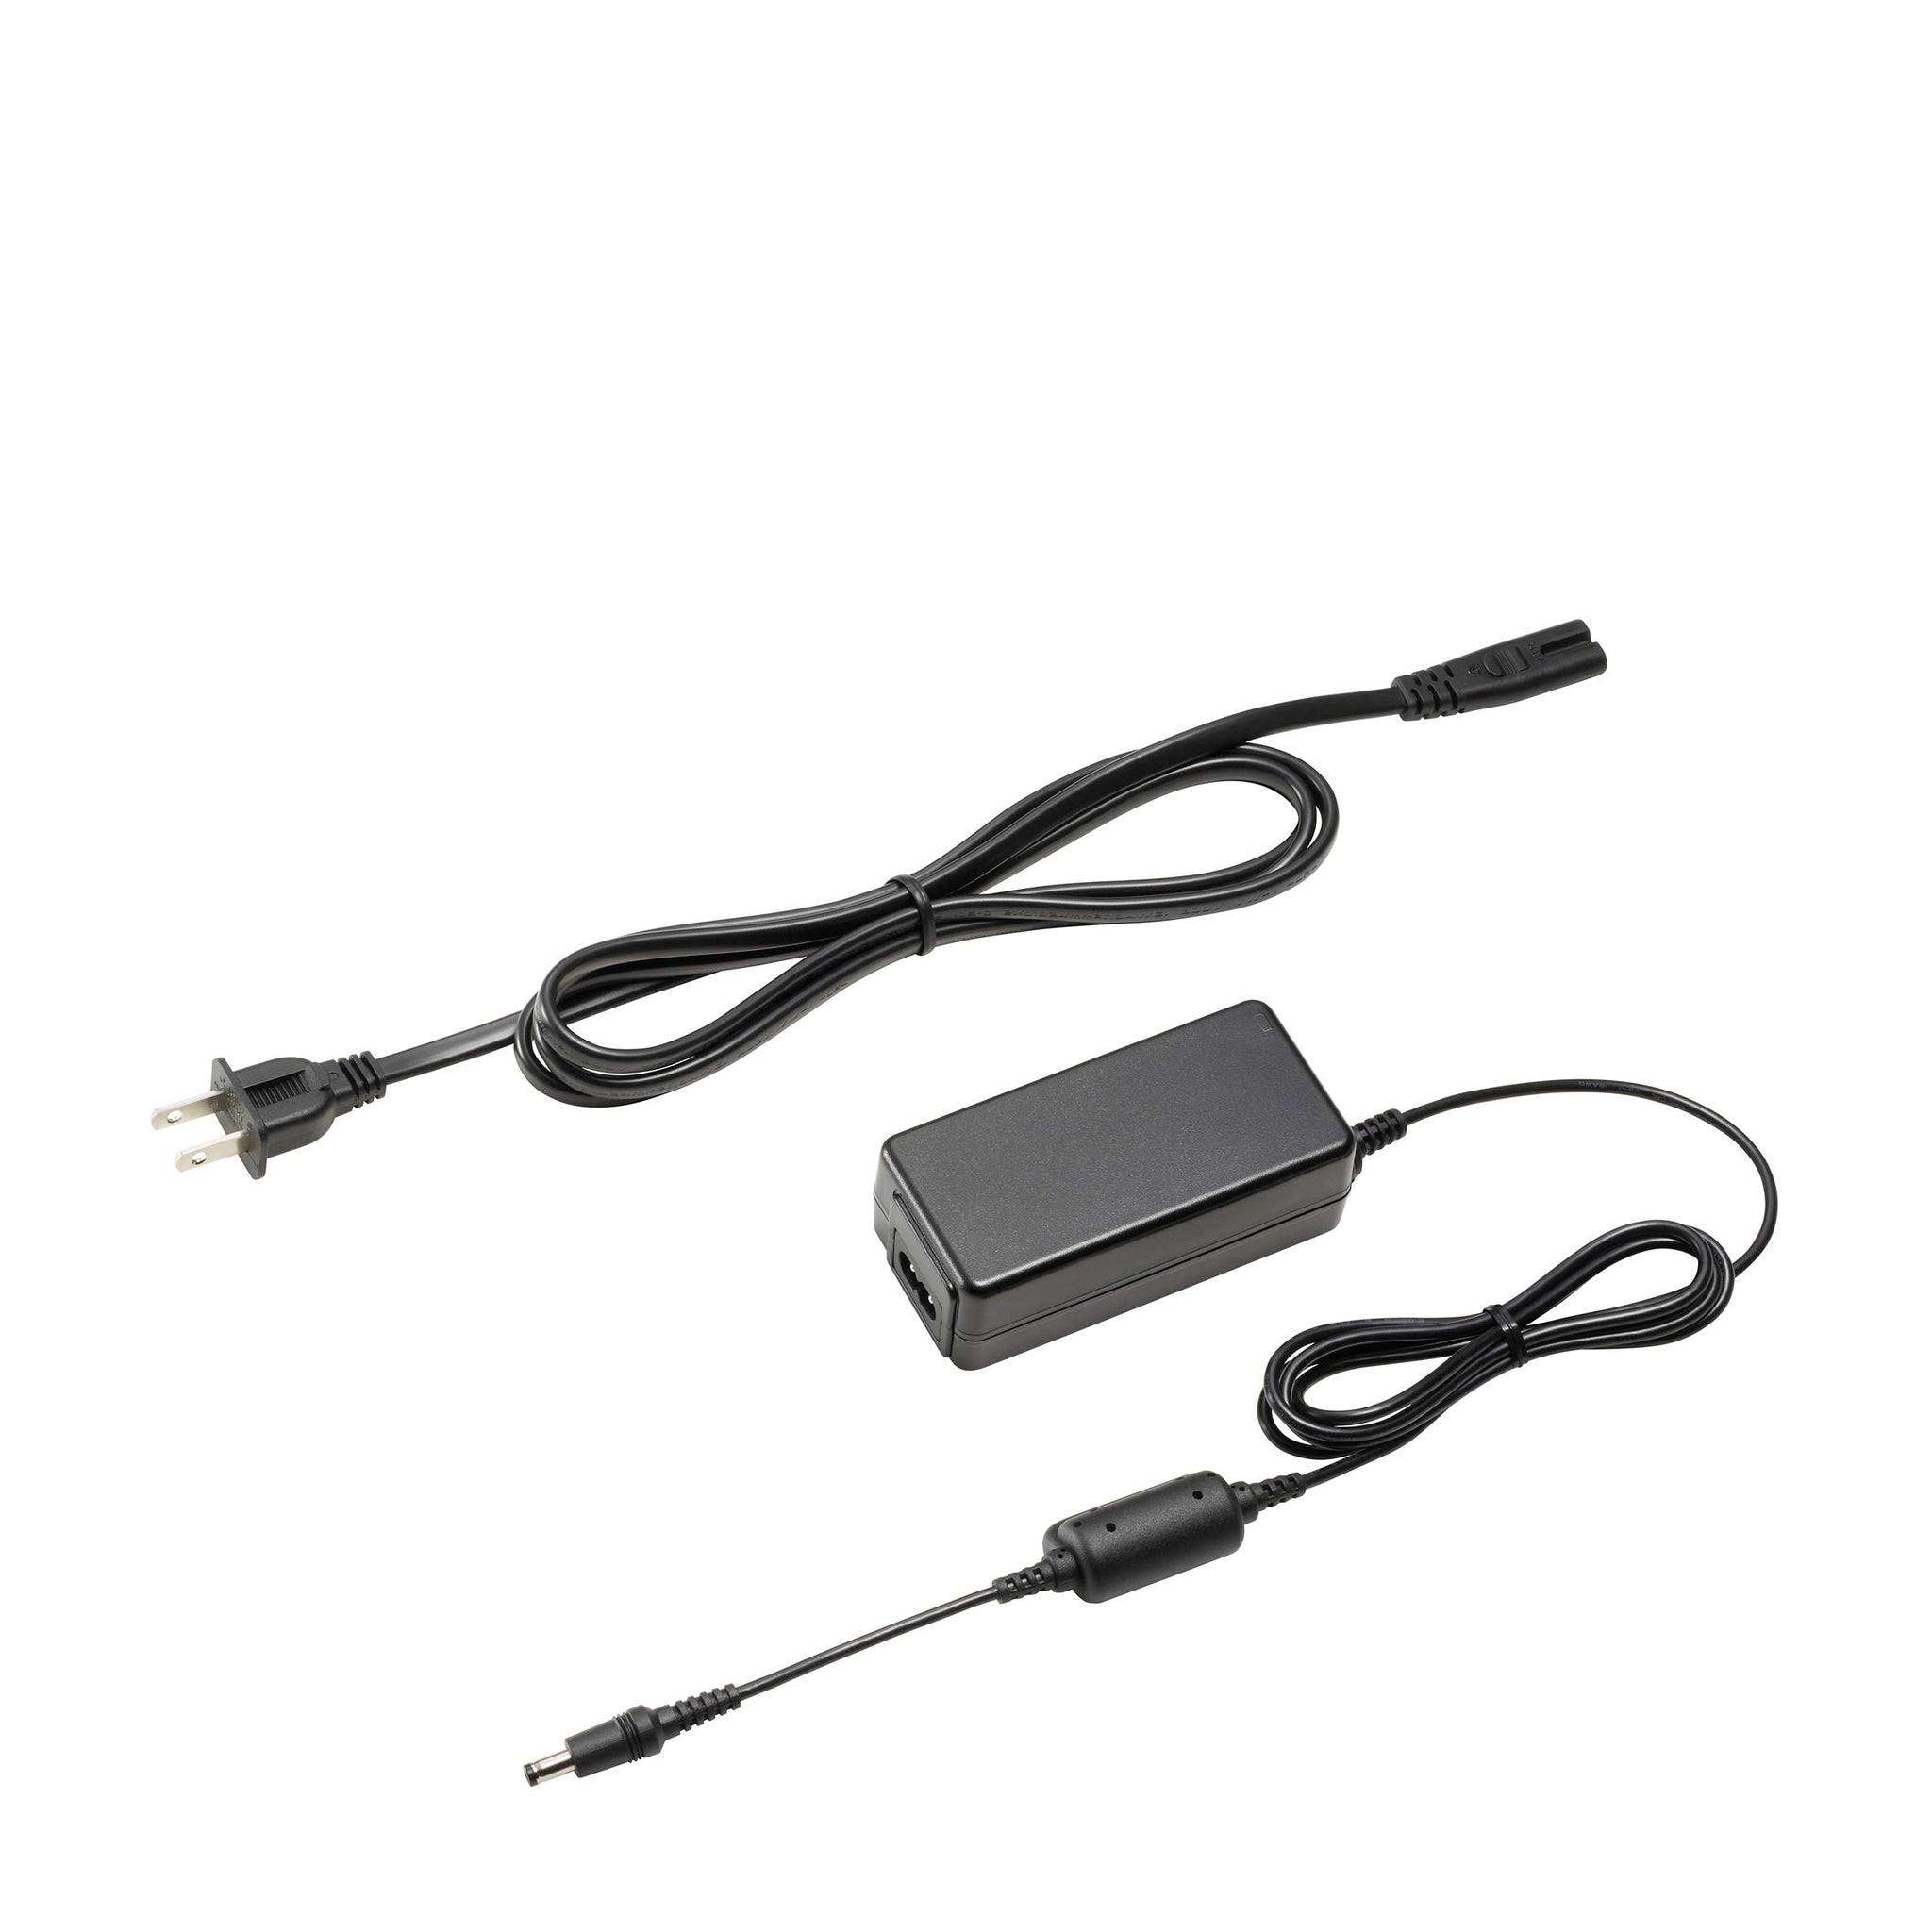 AC Adapter for GH4 and GH5